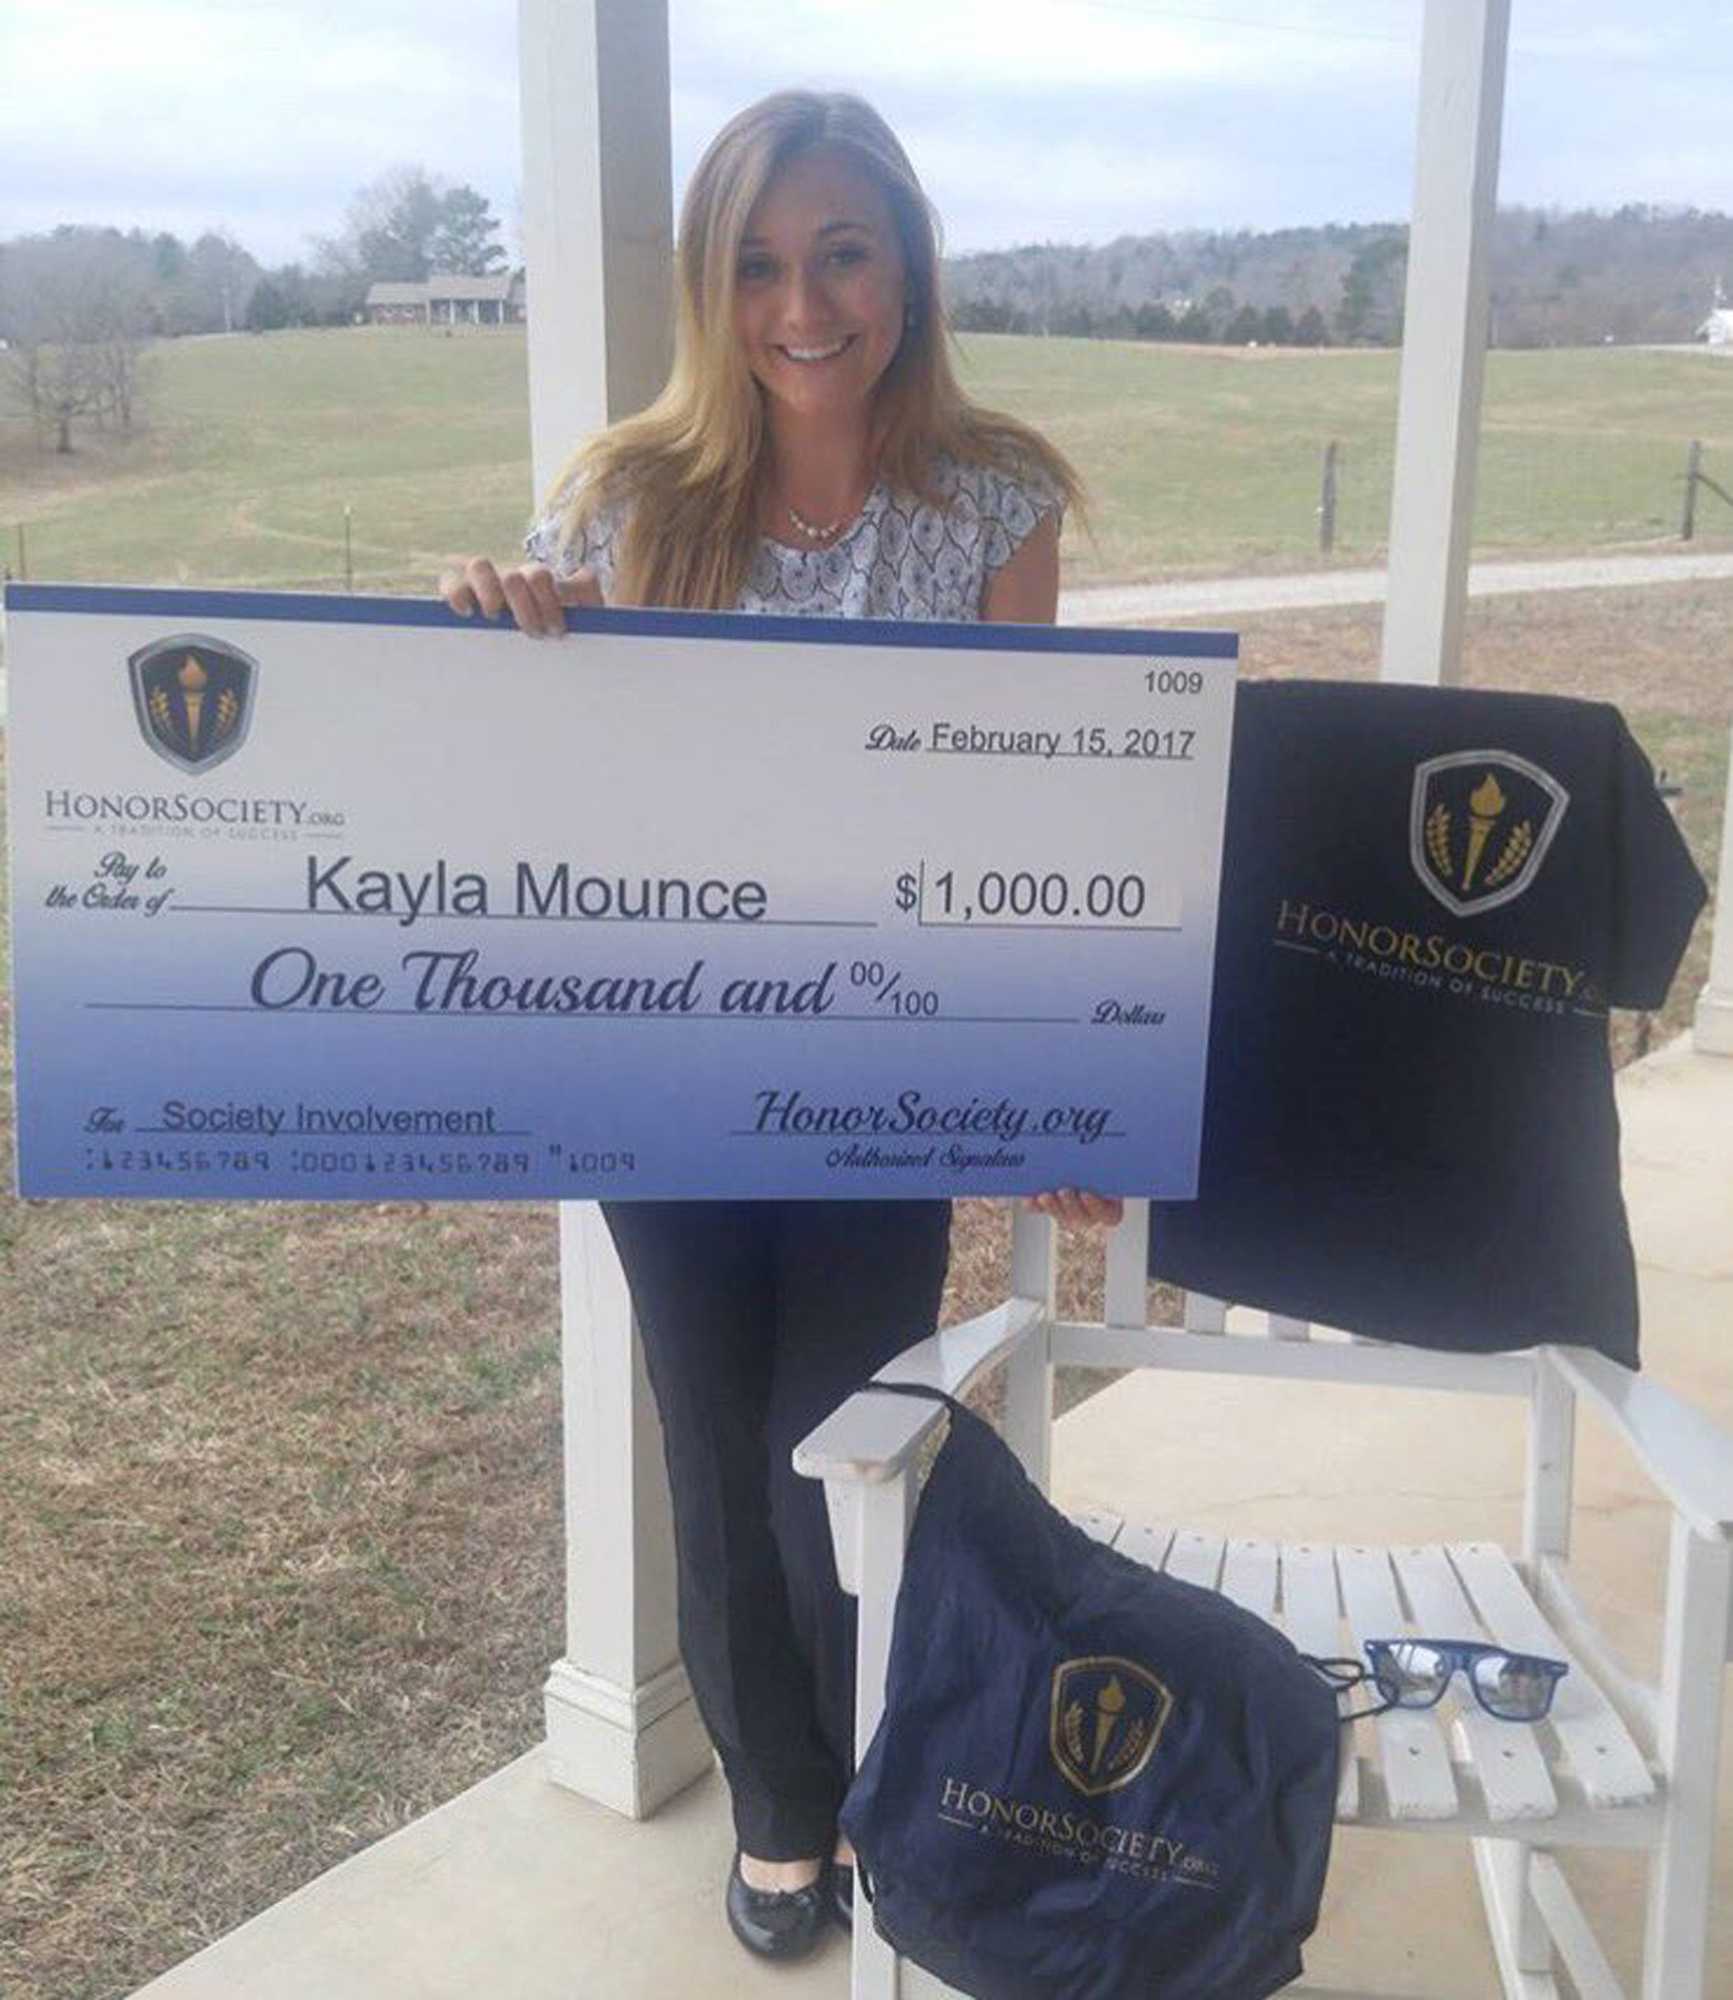 The winner of the honors scholorship, Kayla Mounce.